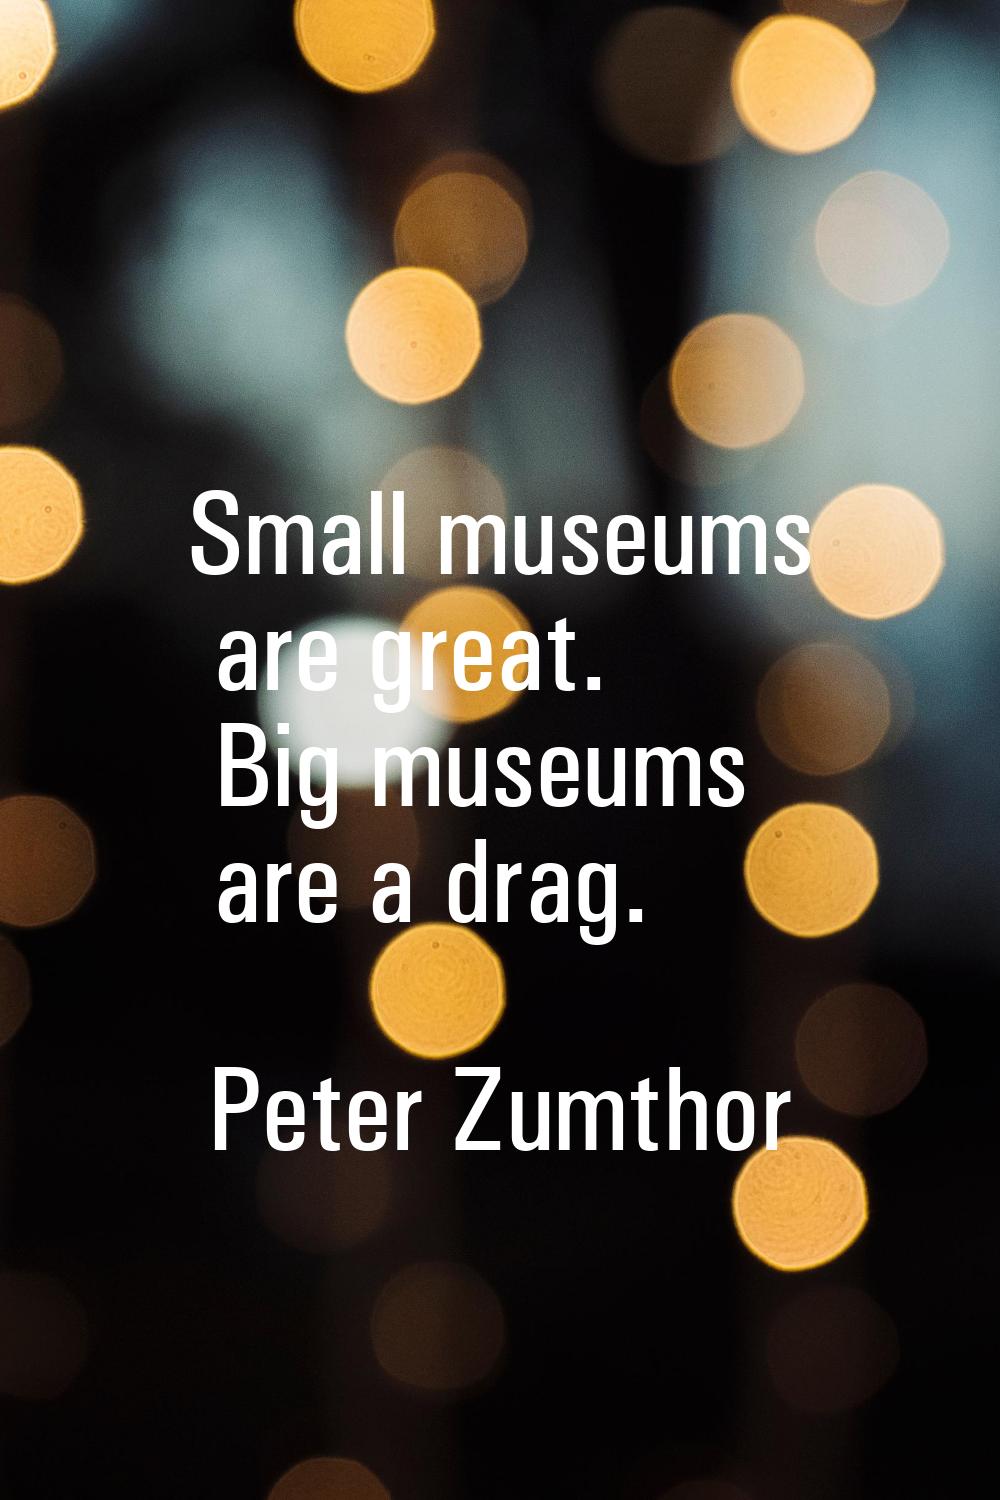 Small museums are great. Big museums are a drag.